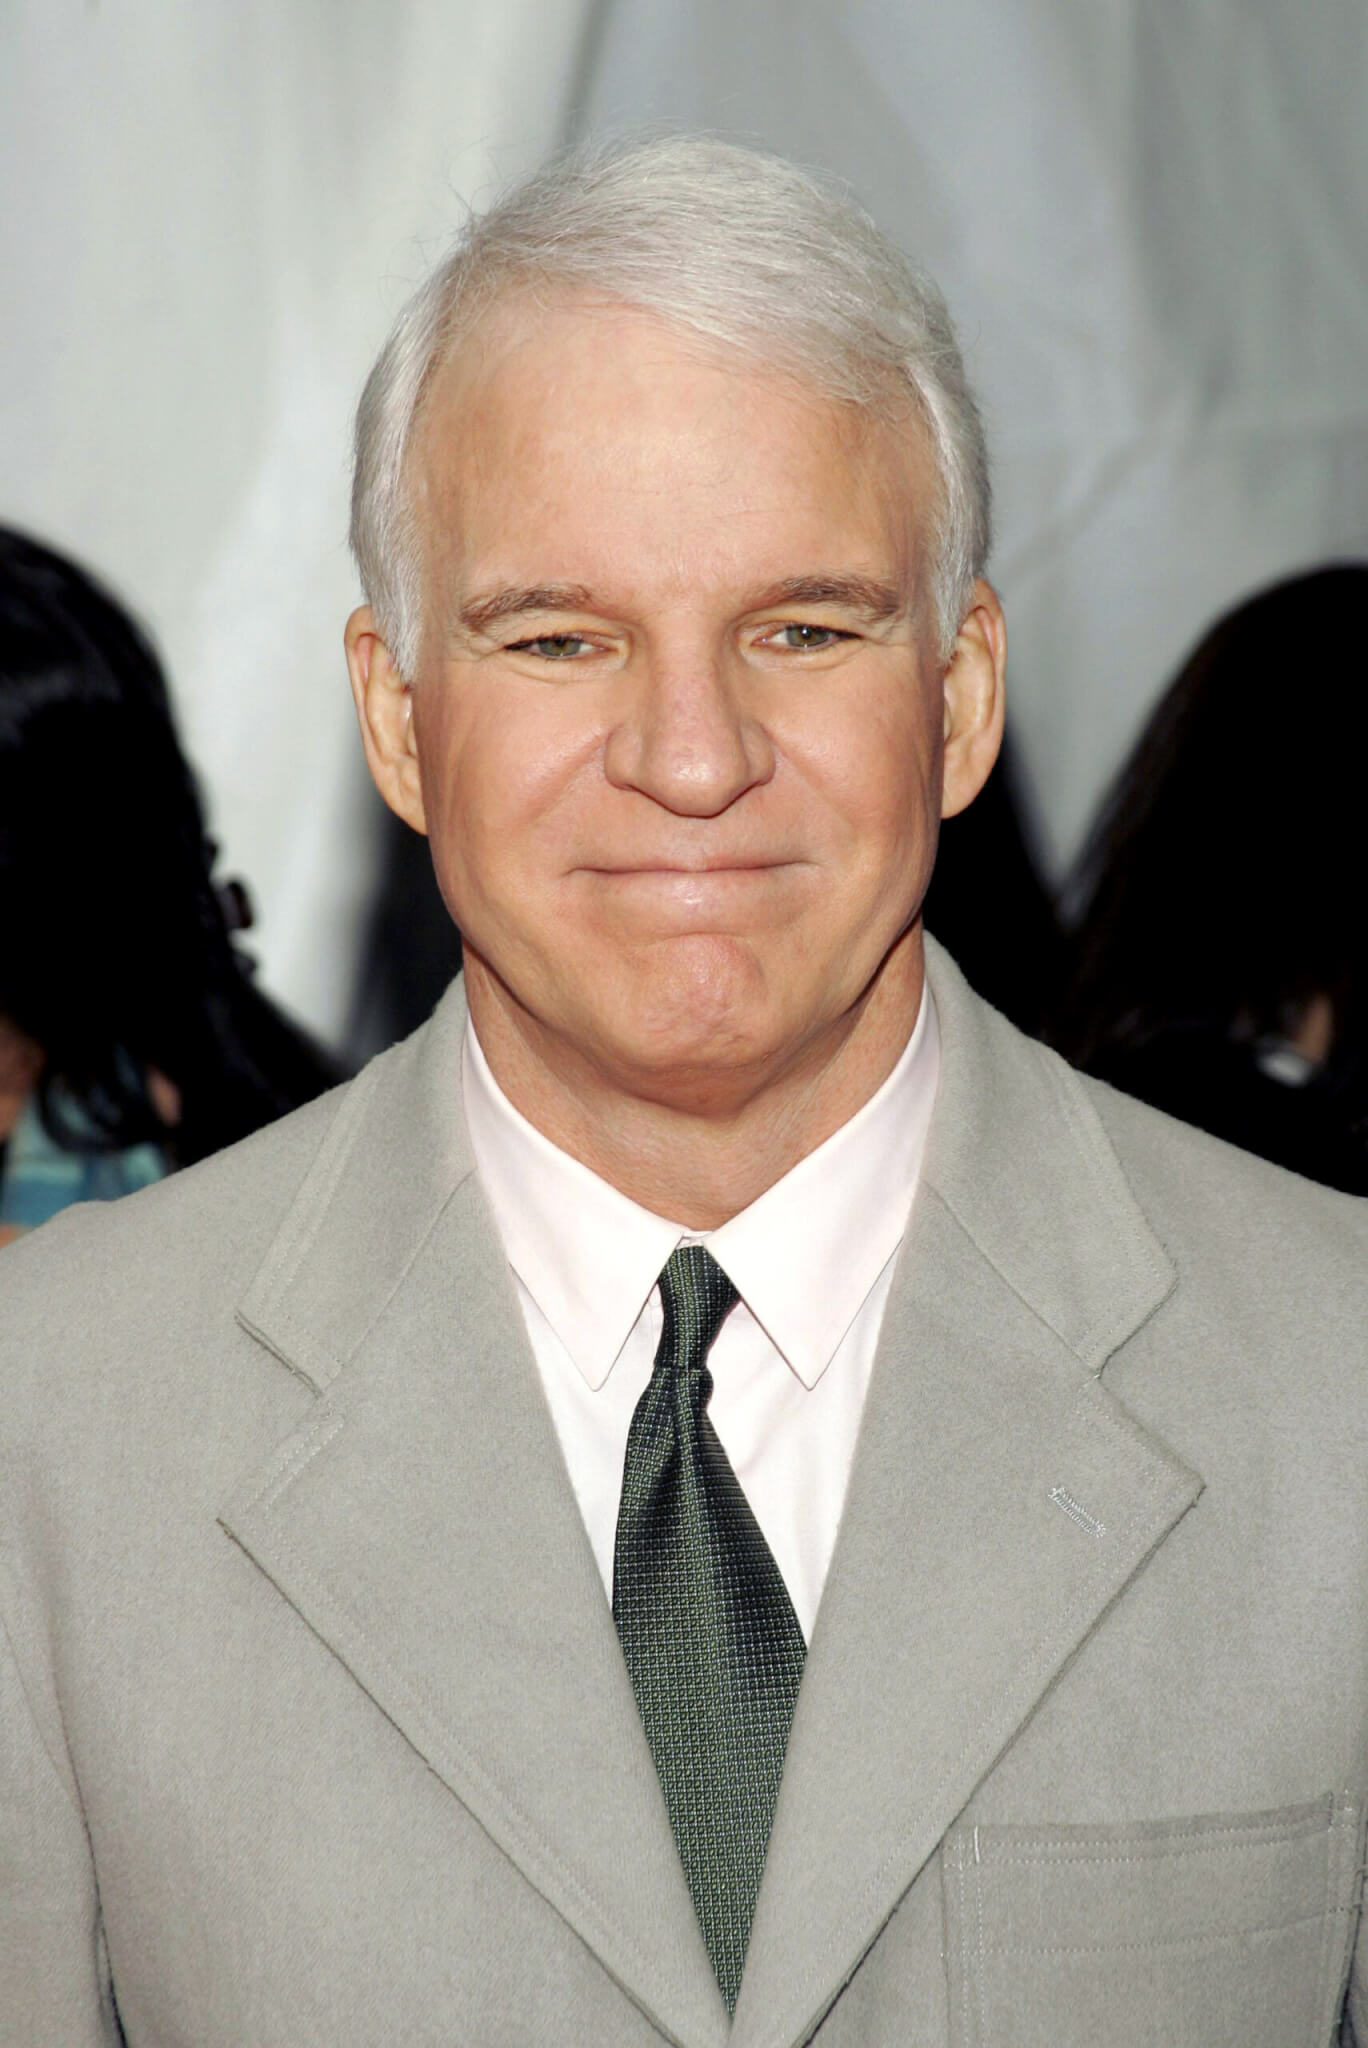 Steve Martin at the 2006 "Pink Panther" premiere